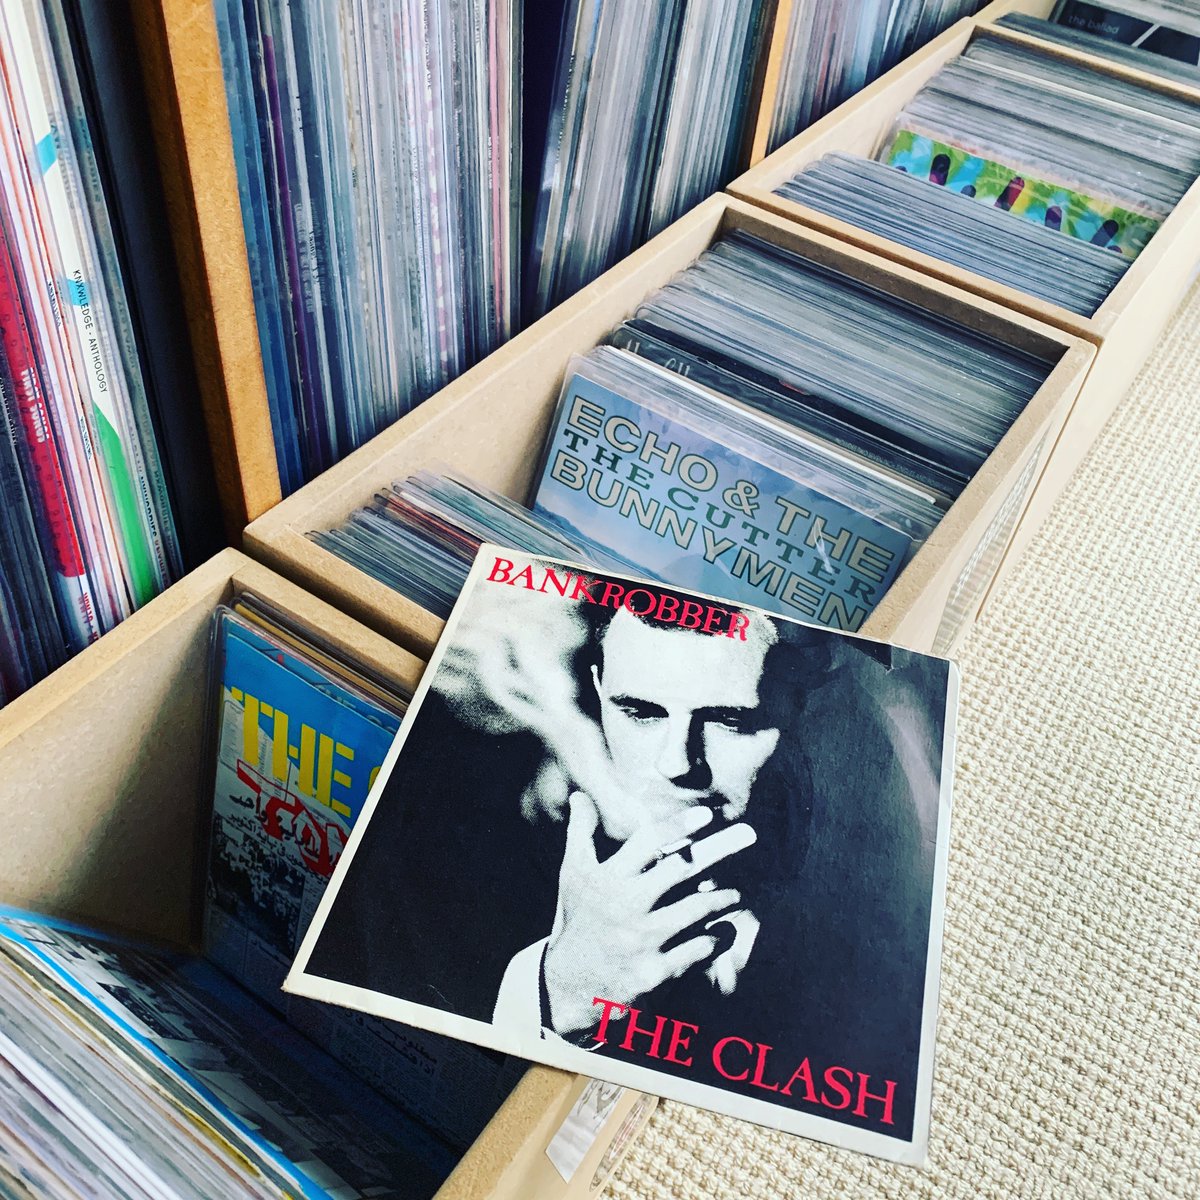 Daddy was a Bankrobber… #vinylcommunity #theclash #mikeydread #45rpm